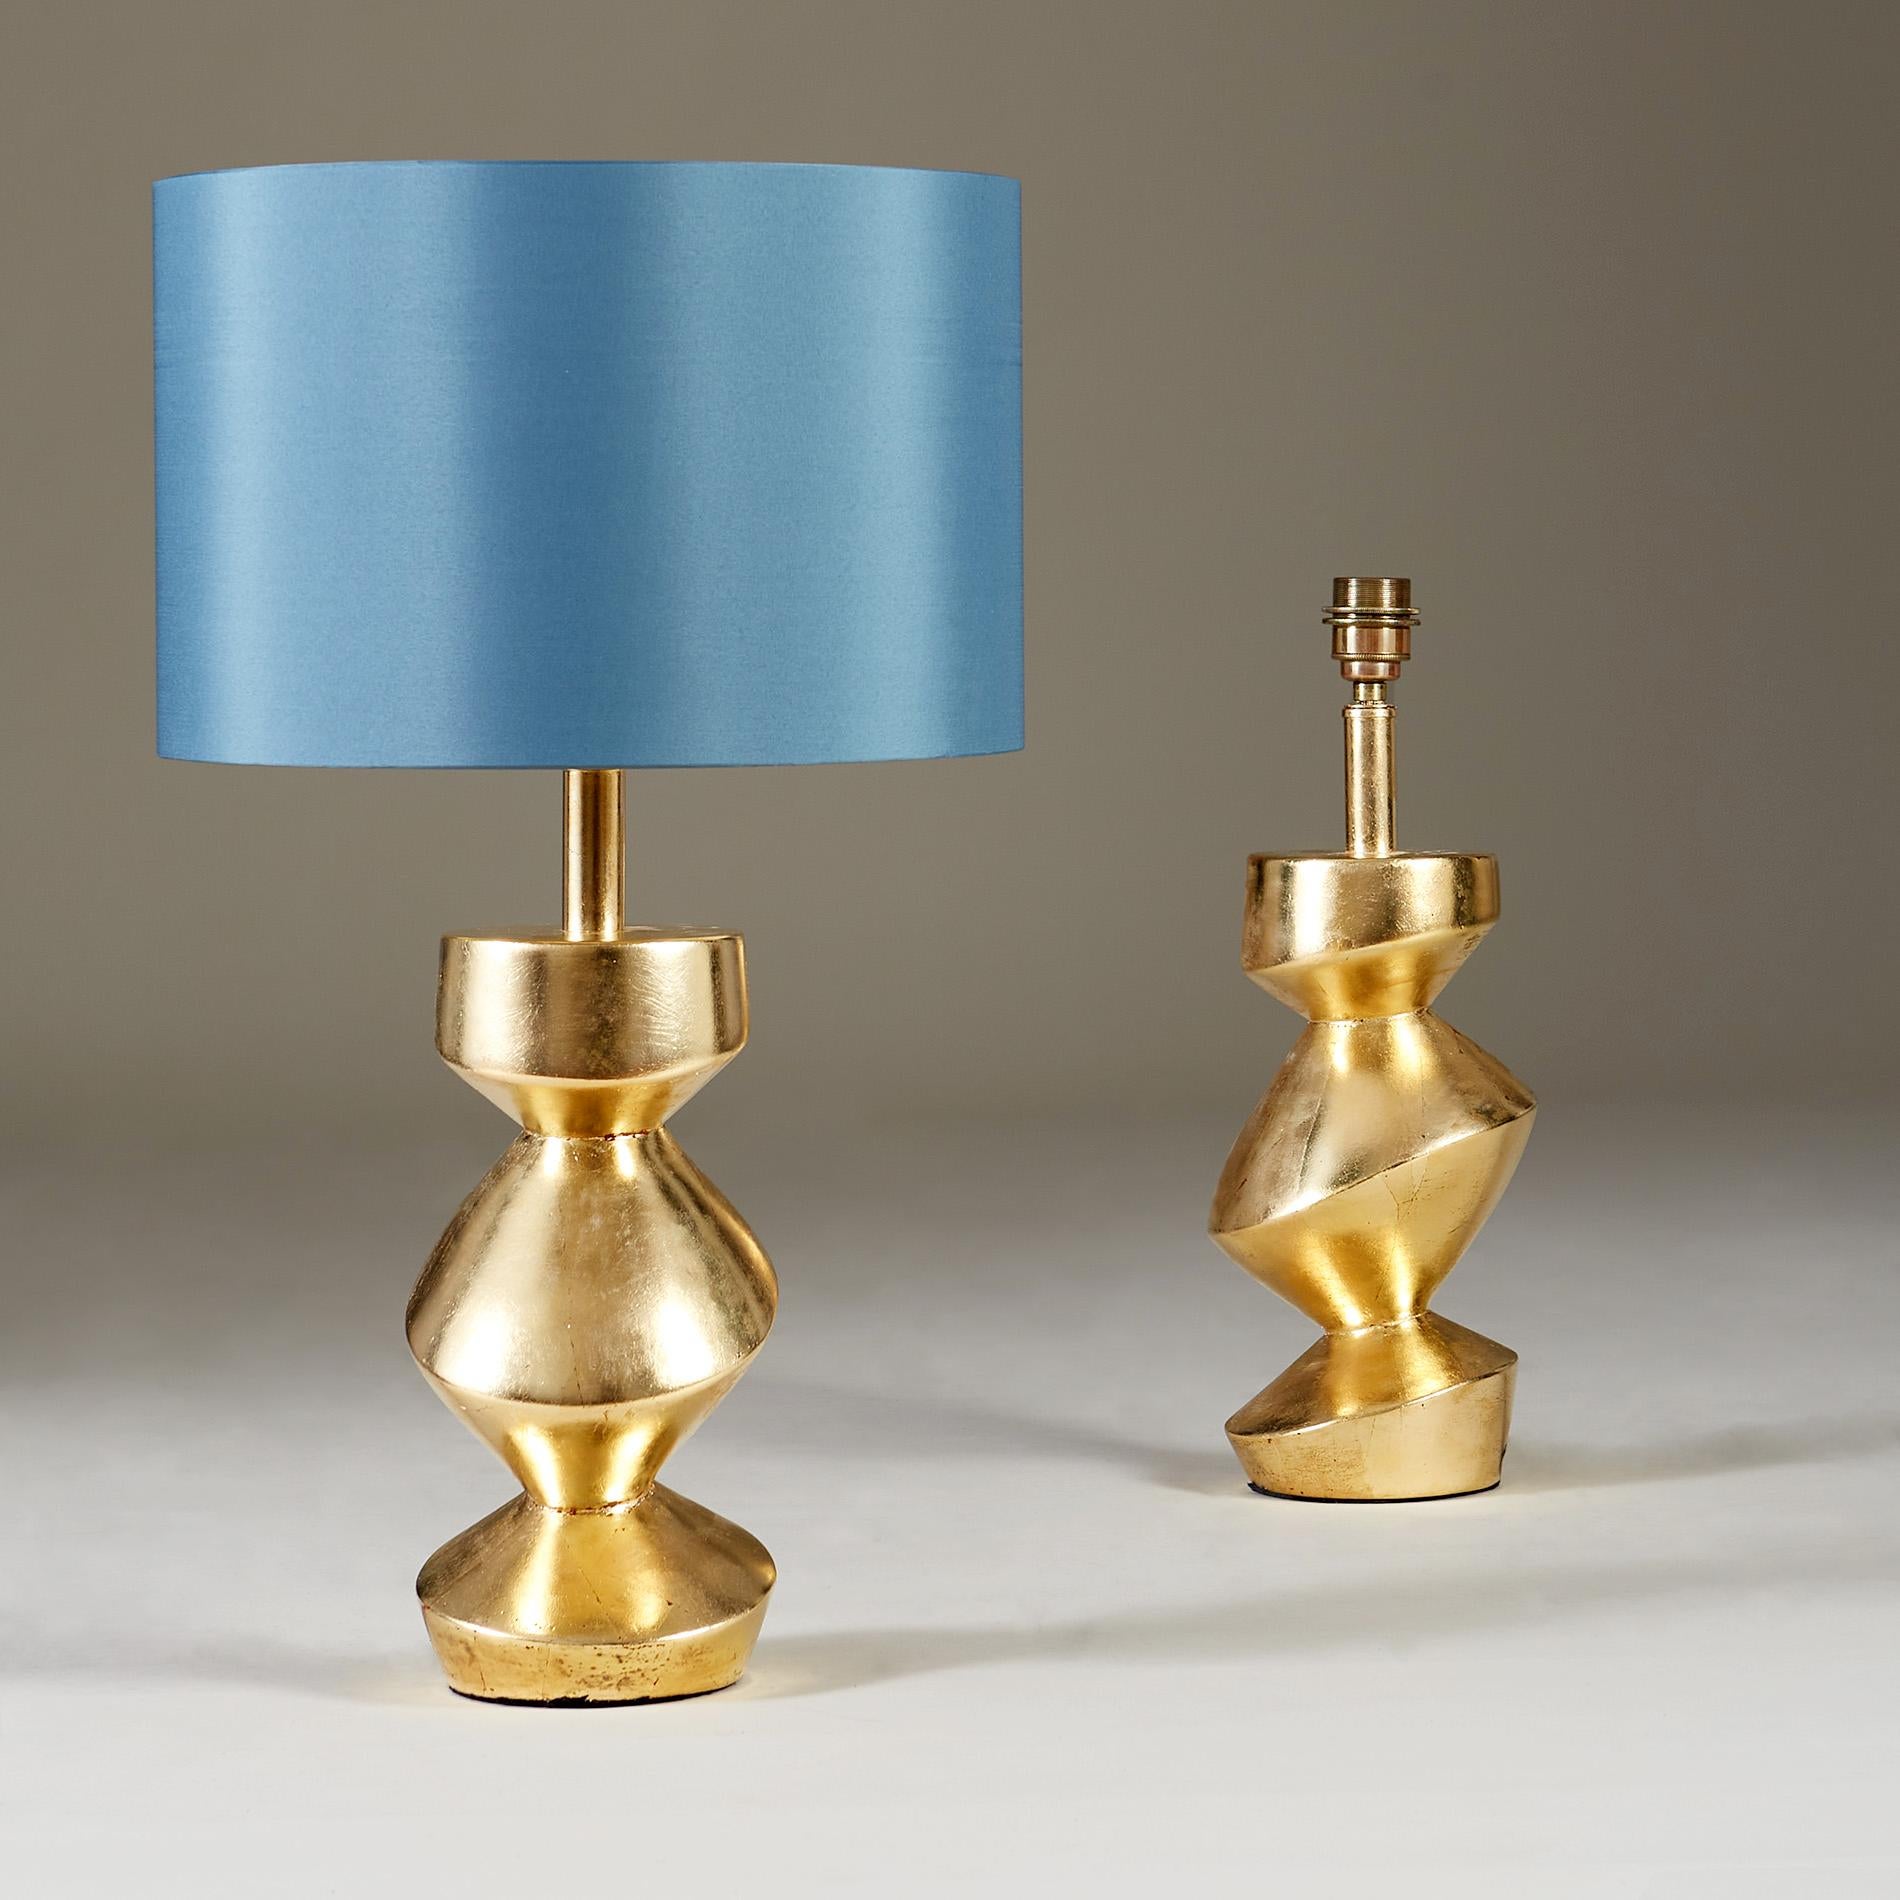 ’Savoy’ table lamps inspired by the forties glamour of the Savoy Hotel, London.

Handmade in cast plaster. Large smooth sculpted curves designed to look good from all angles.

Sold individually, or as a pair, this chic lamp combines art and